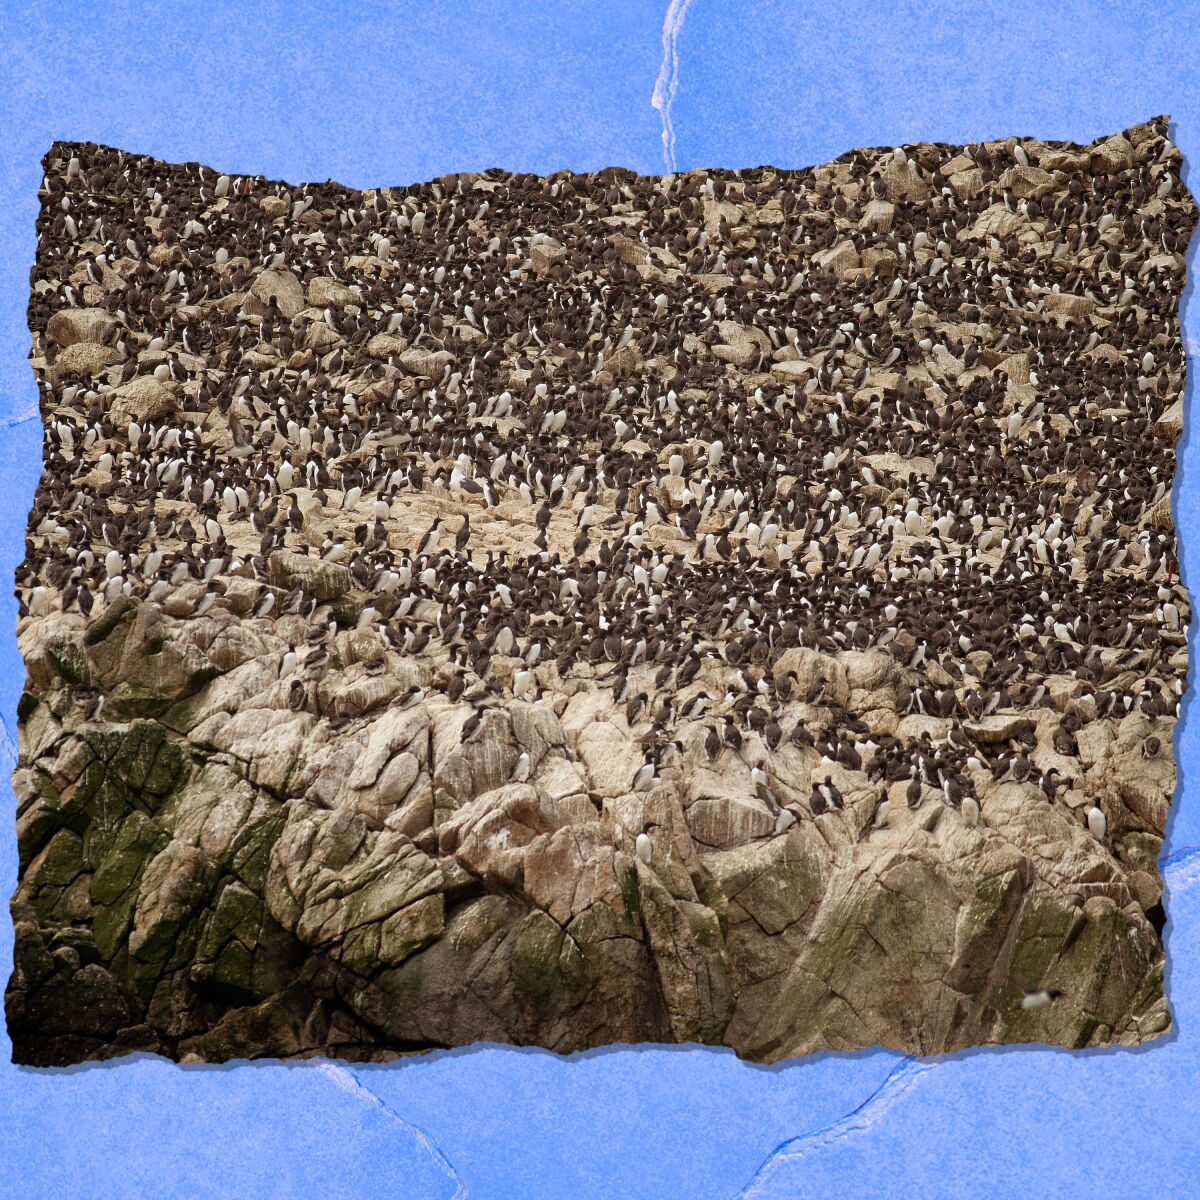 A multitude of birds are seen covering a rocky area.